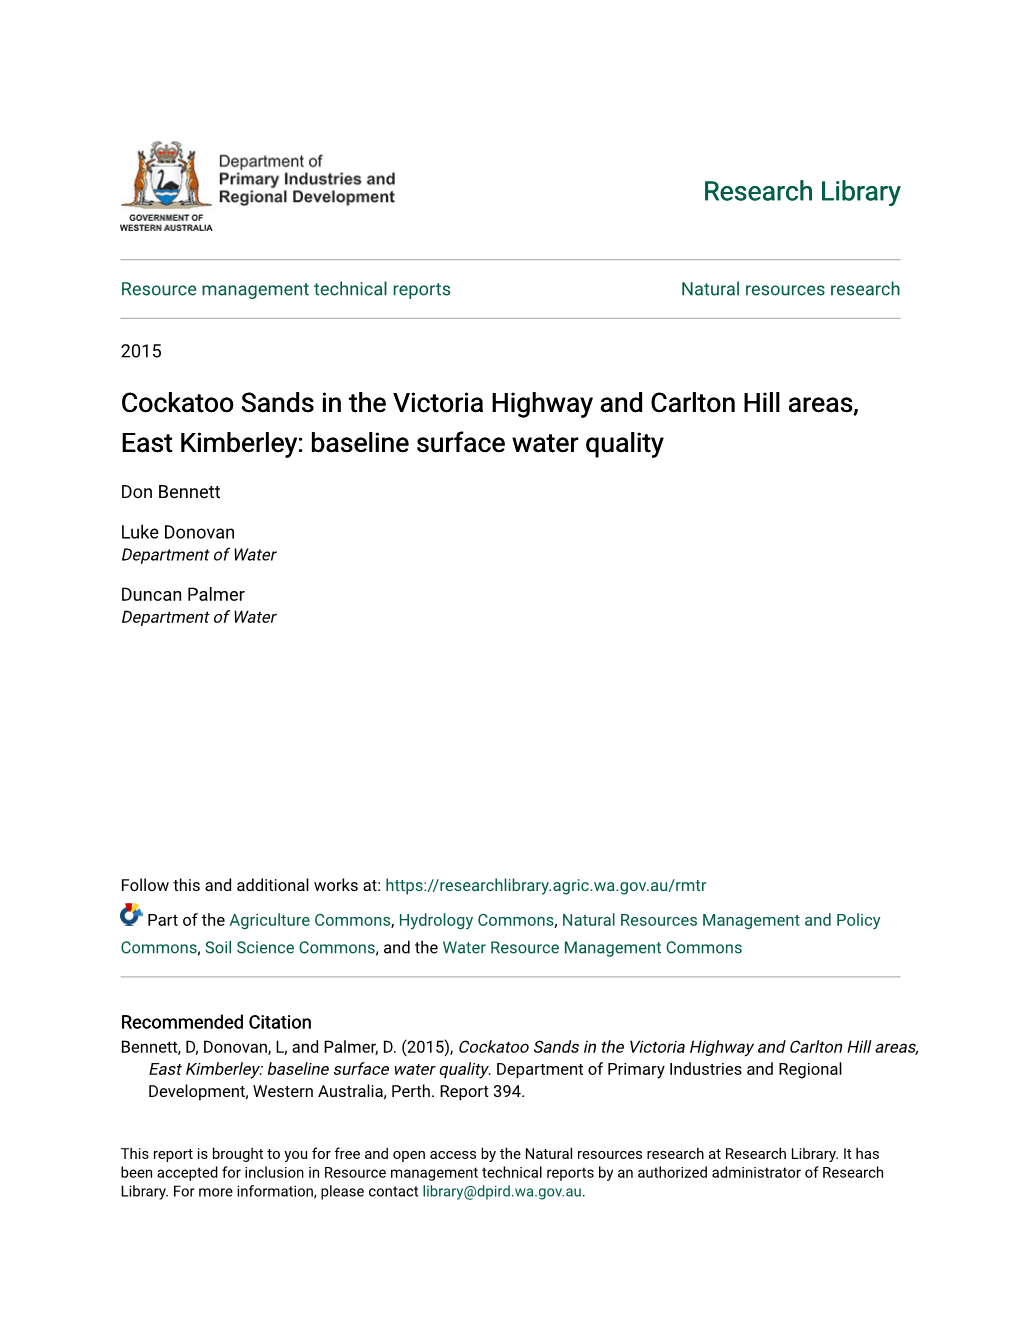 Cockatoo Sands in the Victoria Highway and Carlton Hill Areas, East Kimberley: Baseline Surface Water Quality